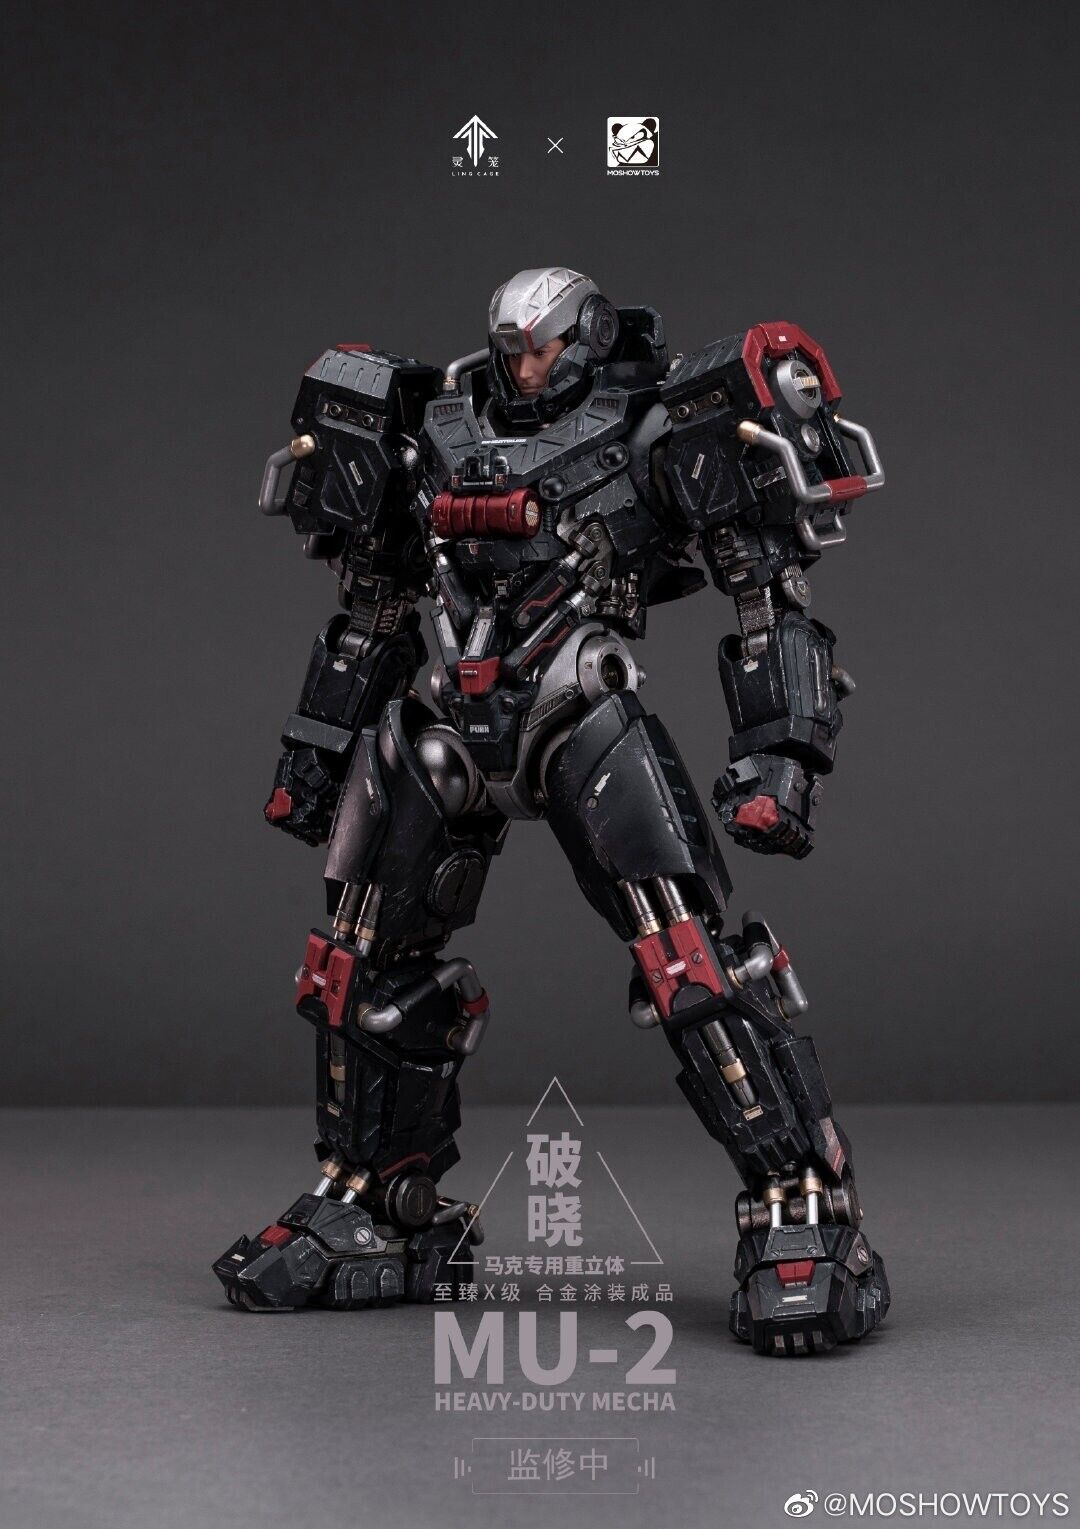 Pre-order MOSHOW MU-2 Heavy-Duty Mecha for Mark LING CAGE INCARNATION Action Toy